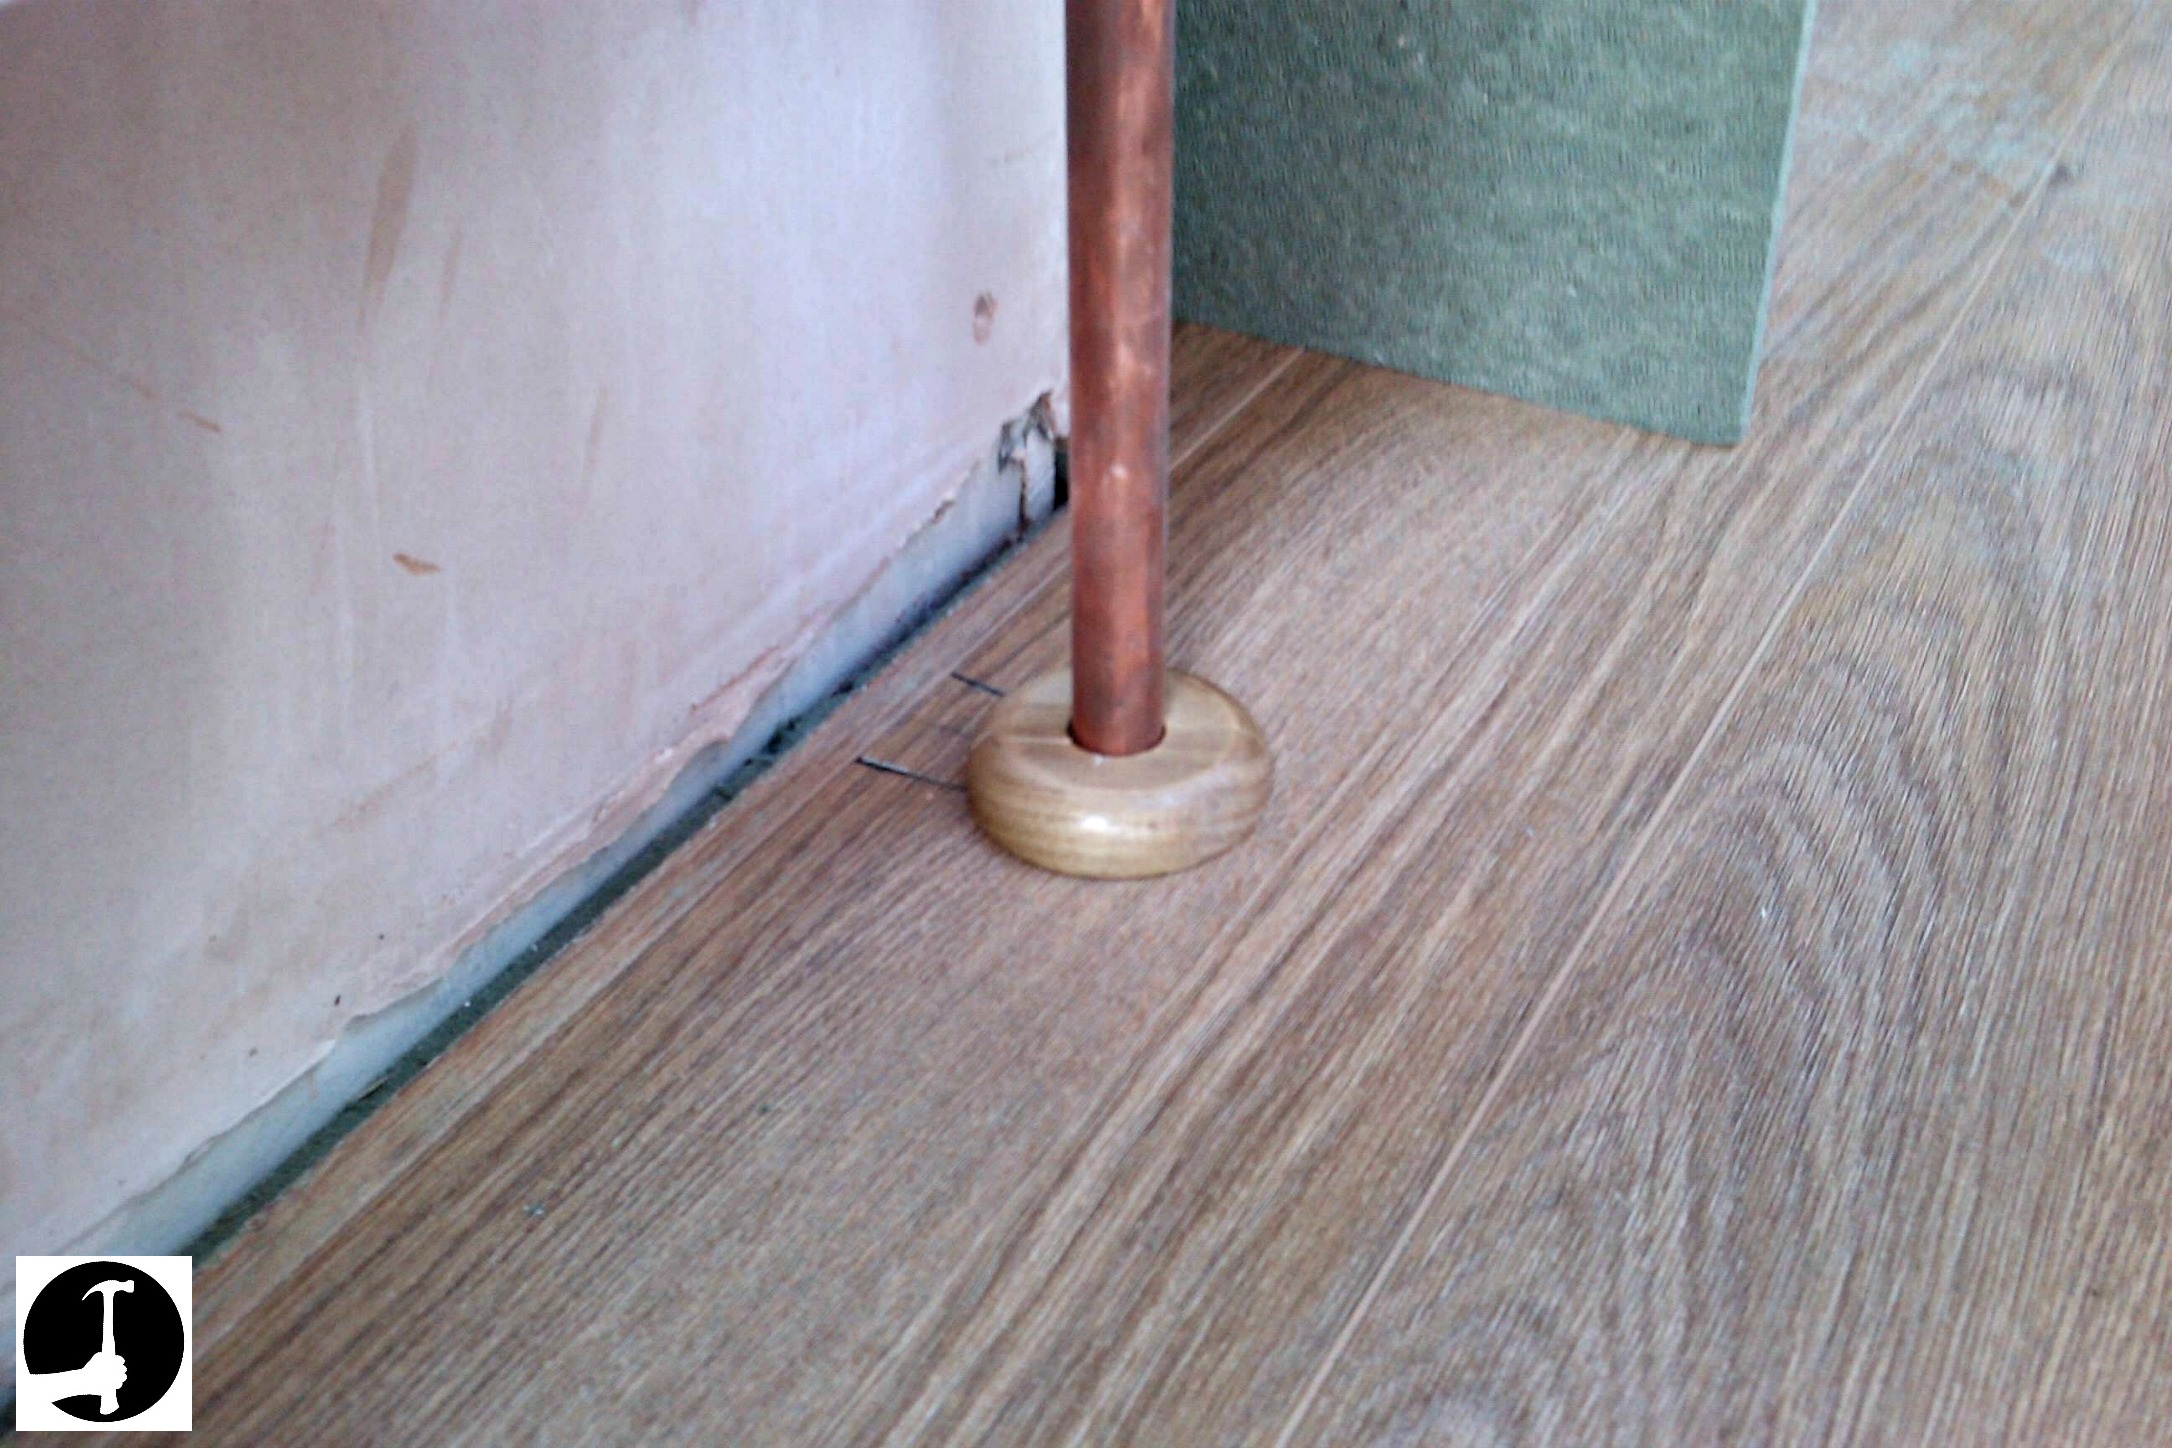 See How I Install Laminate Flooring To, How To Laminate Around Radiator Pipes